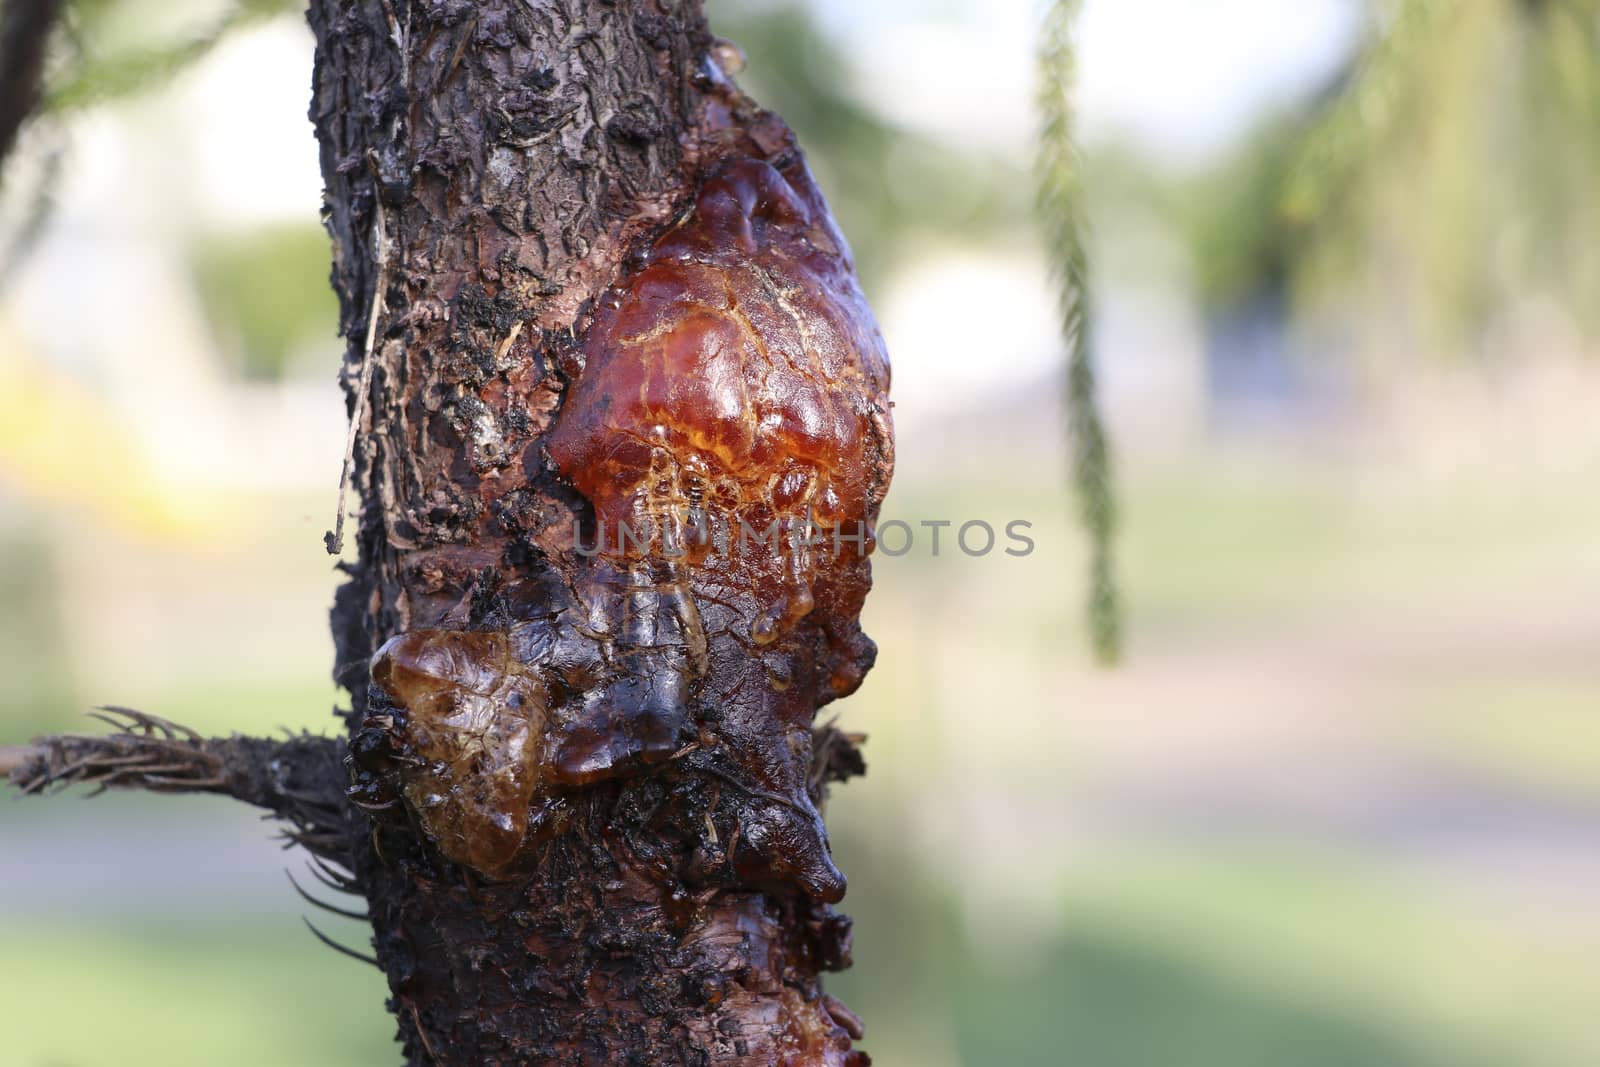 The resin of pine trees flows from the wound on the side of the trunk. The amber liquid that flows from the pine tree. by Eungsuwat